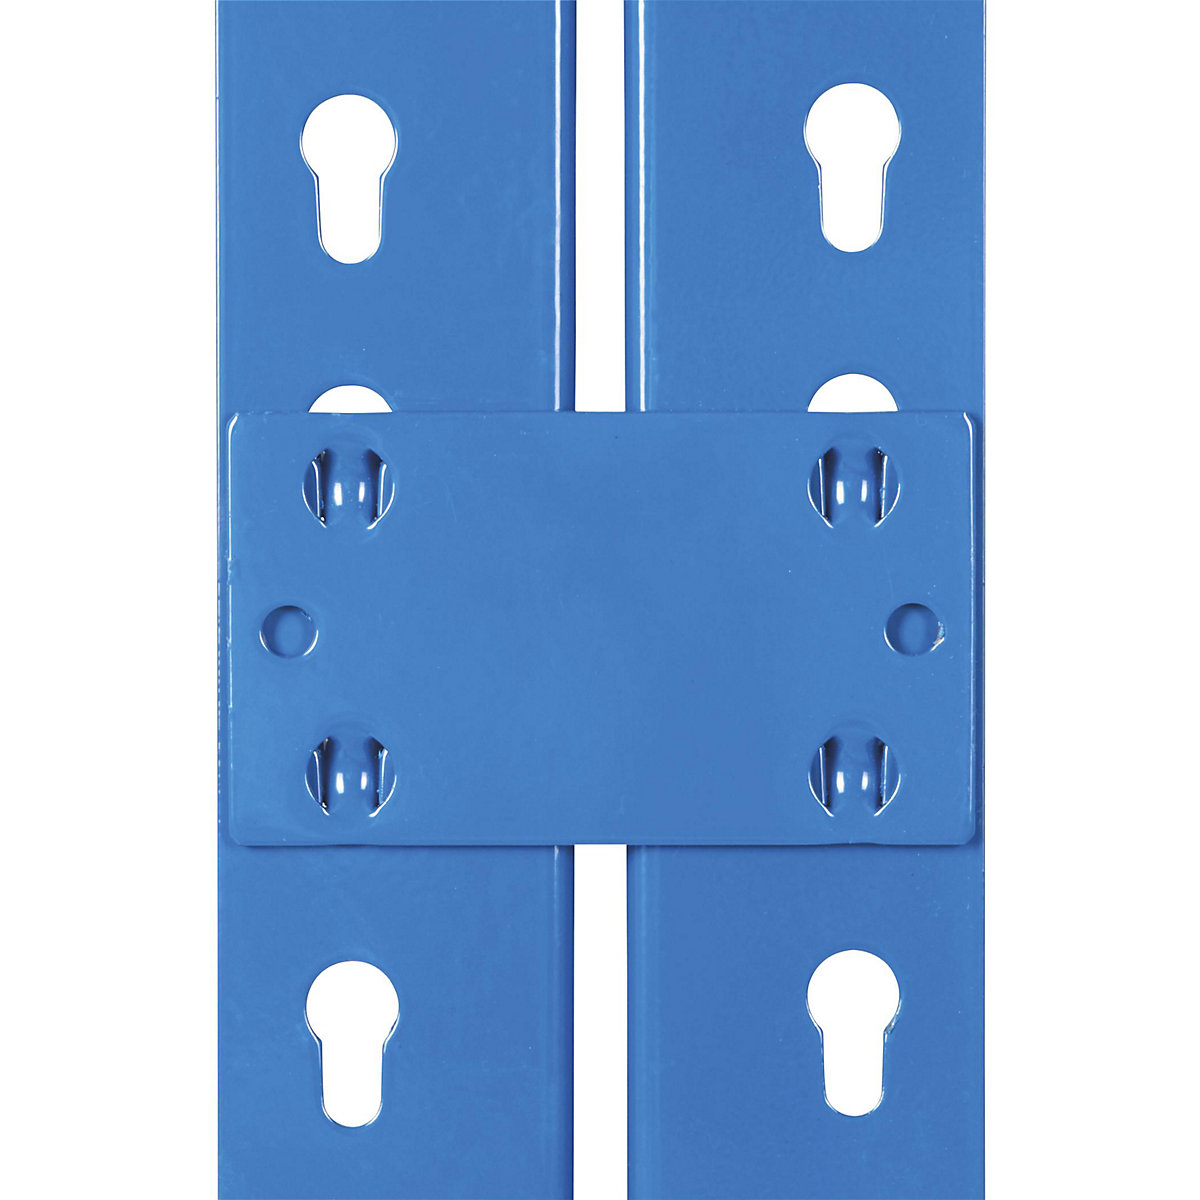 Tie plates for racking with 400 kg maximum load